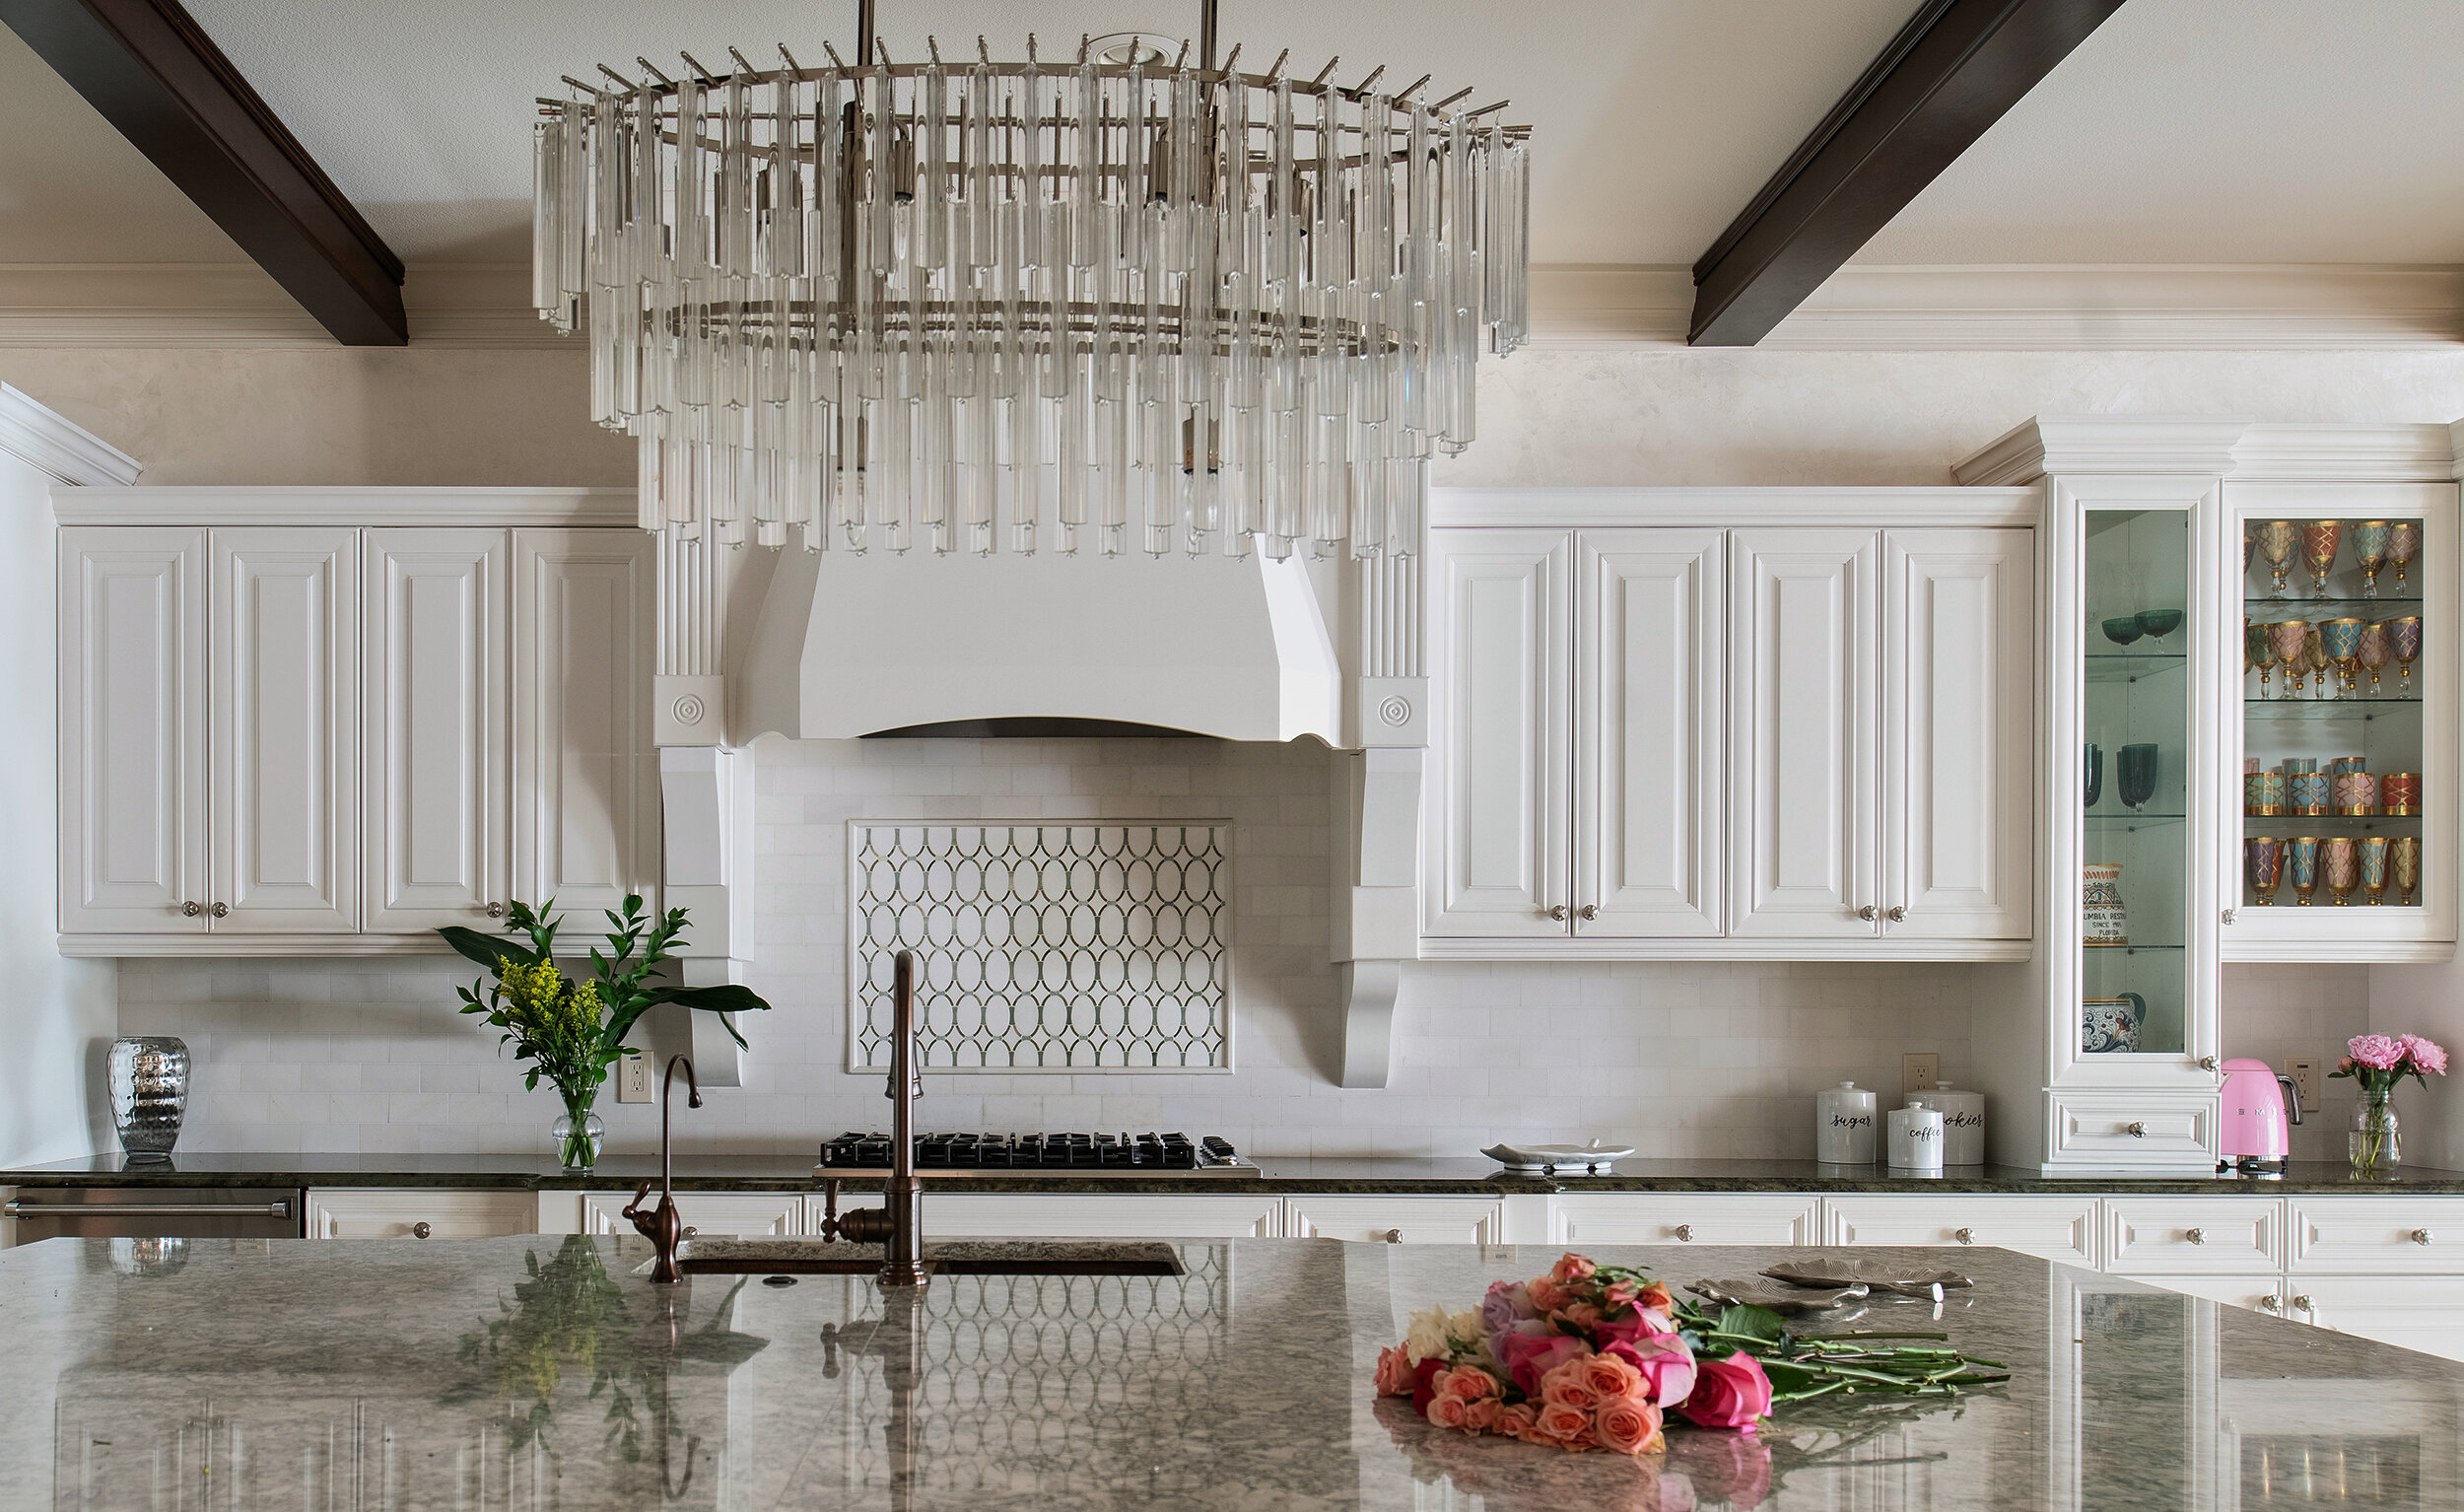 Big white classic modern kitchen crystal chandelier wood trimming